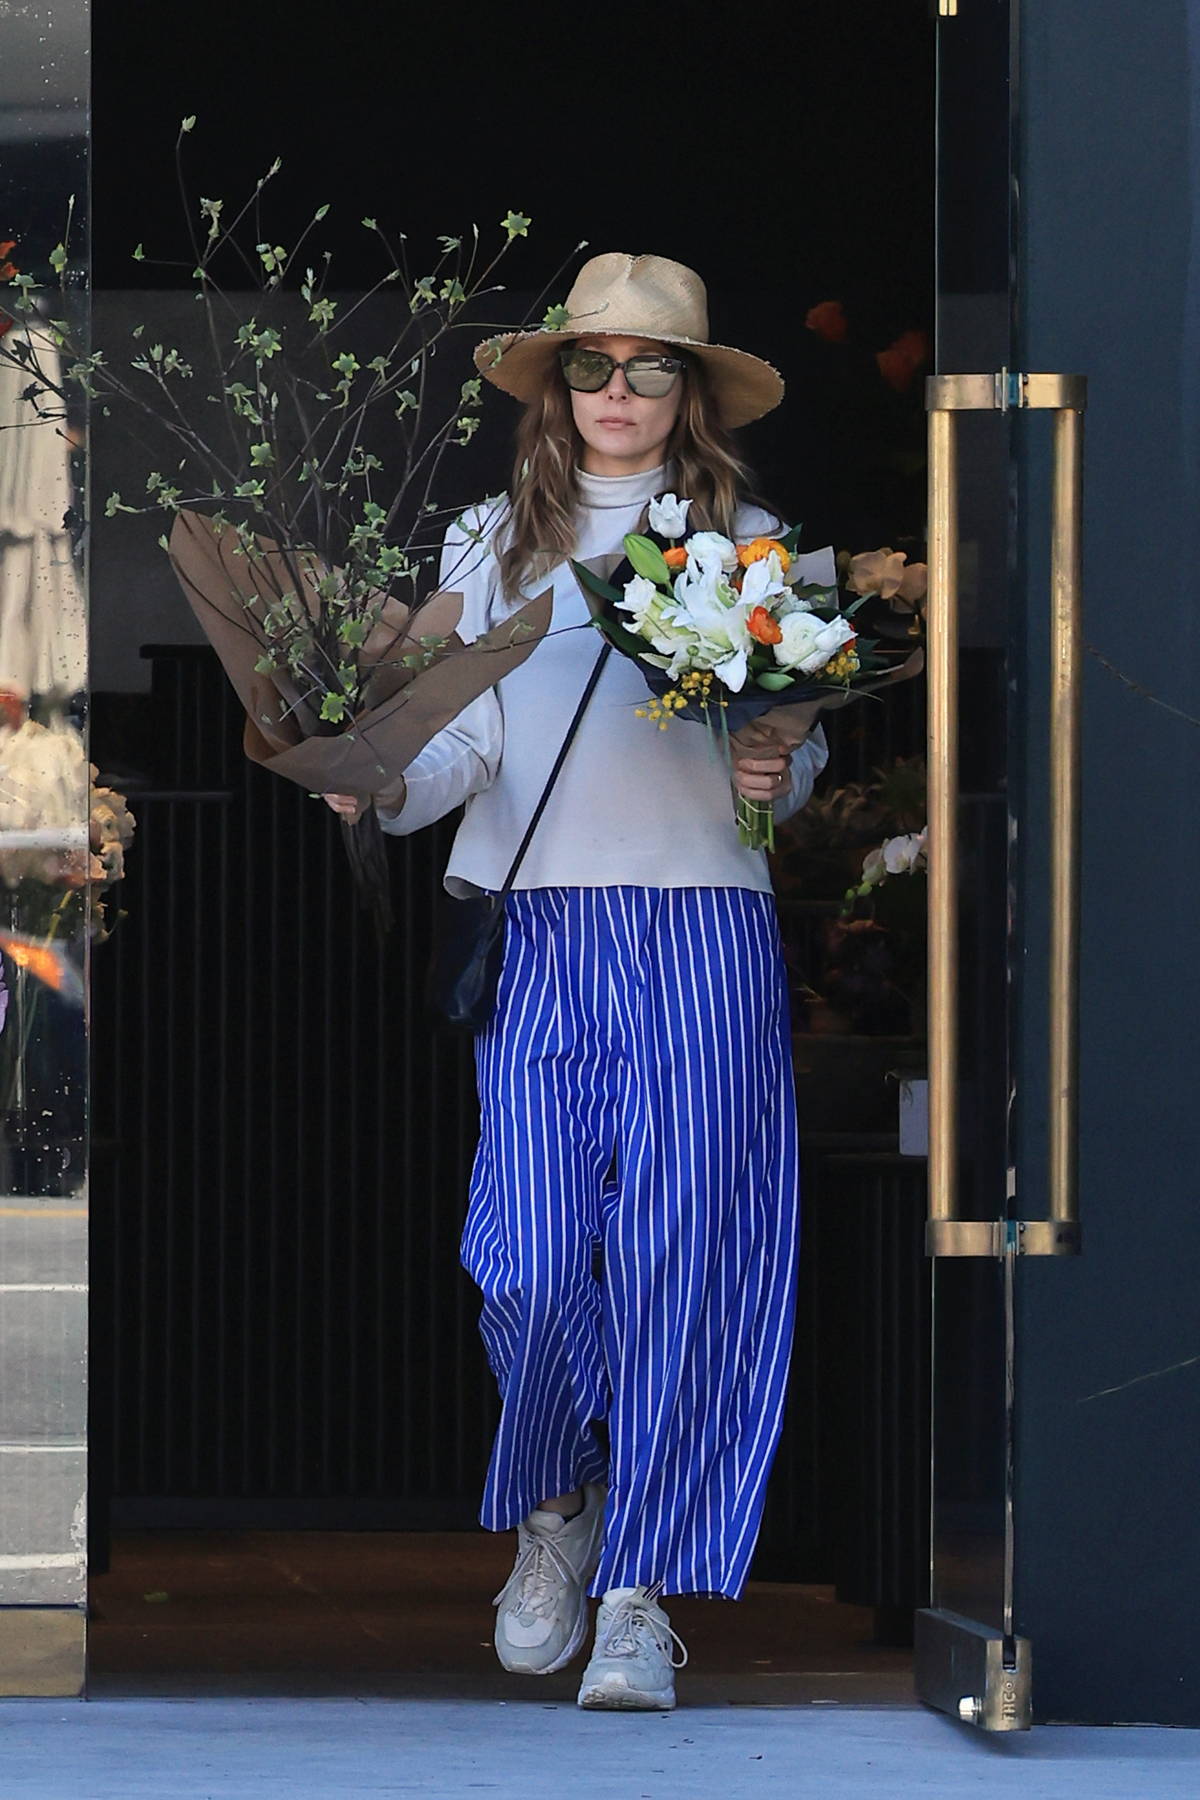 Elizabeth-Olsen-shows-off-her-chic-summer-style-while-visiting-a-florist-in-Los-Angeles-160424_4.jpg